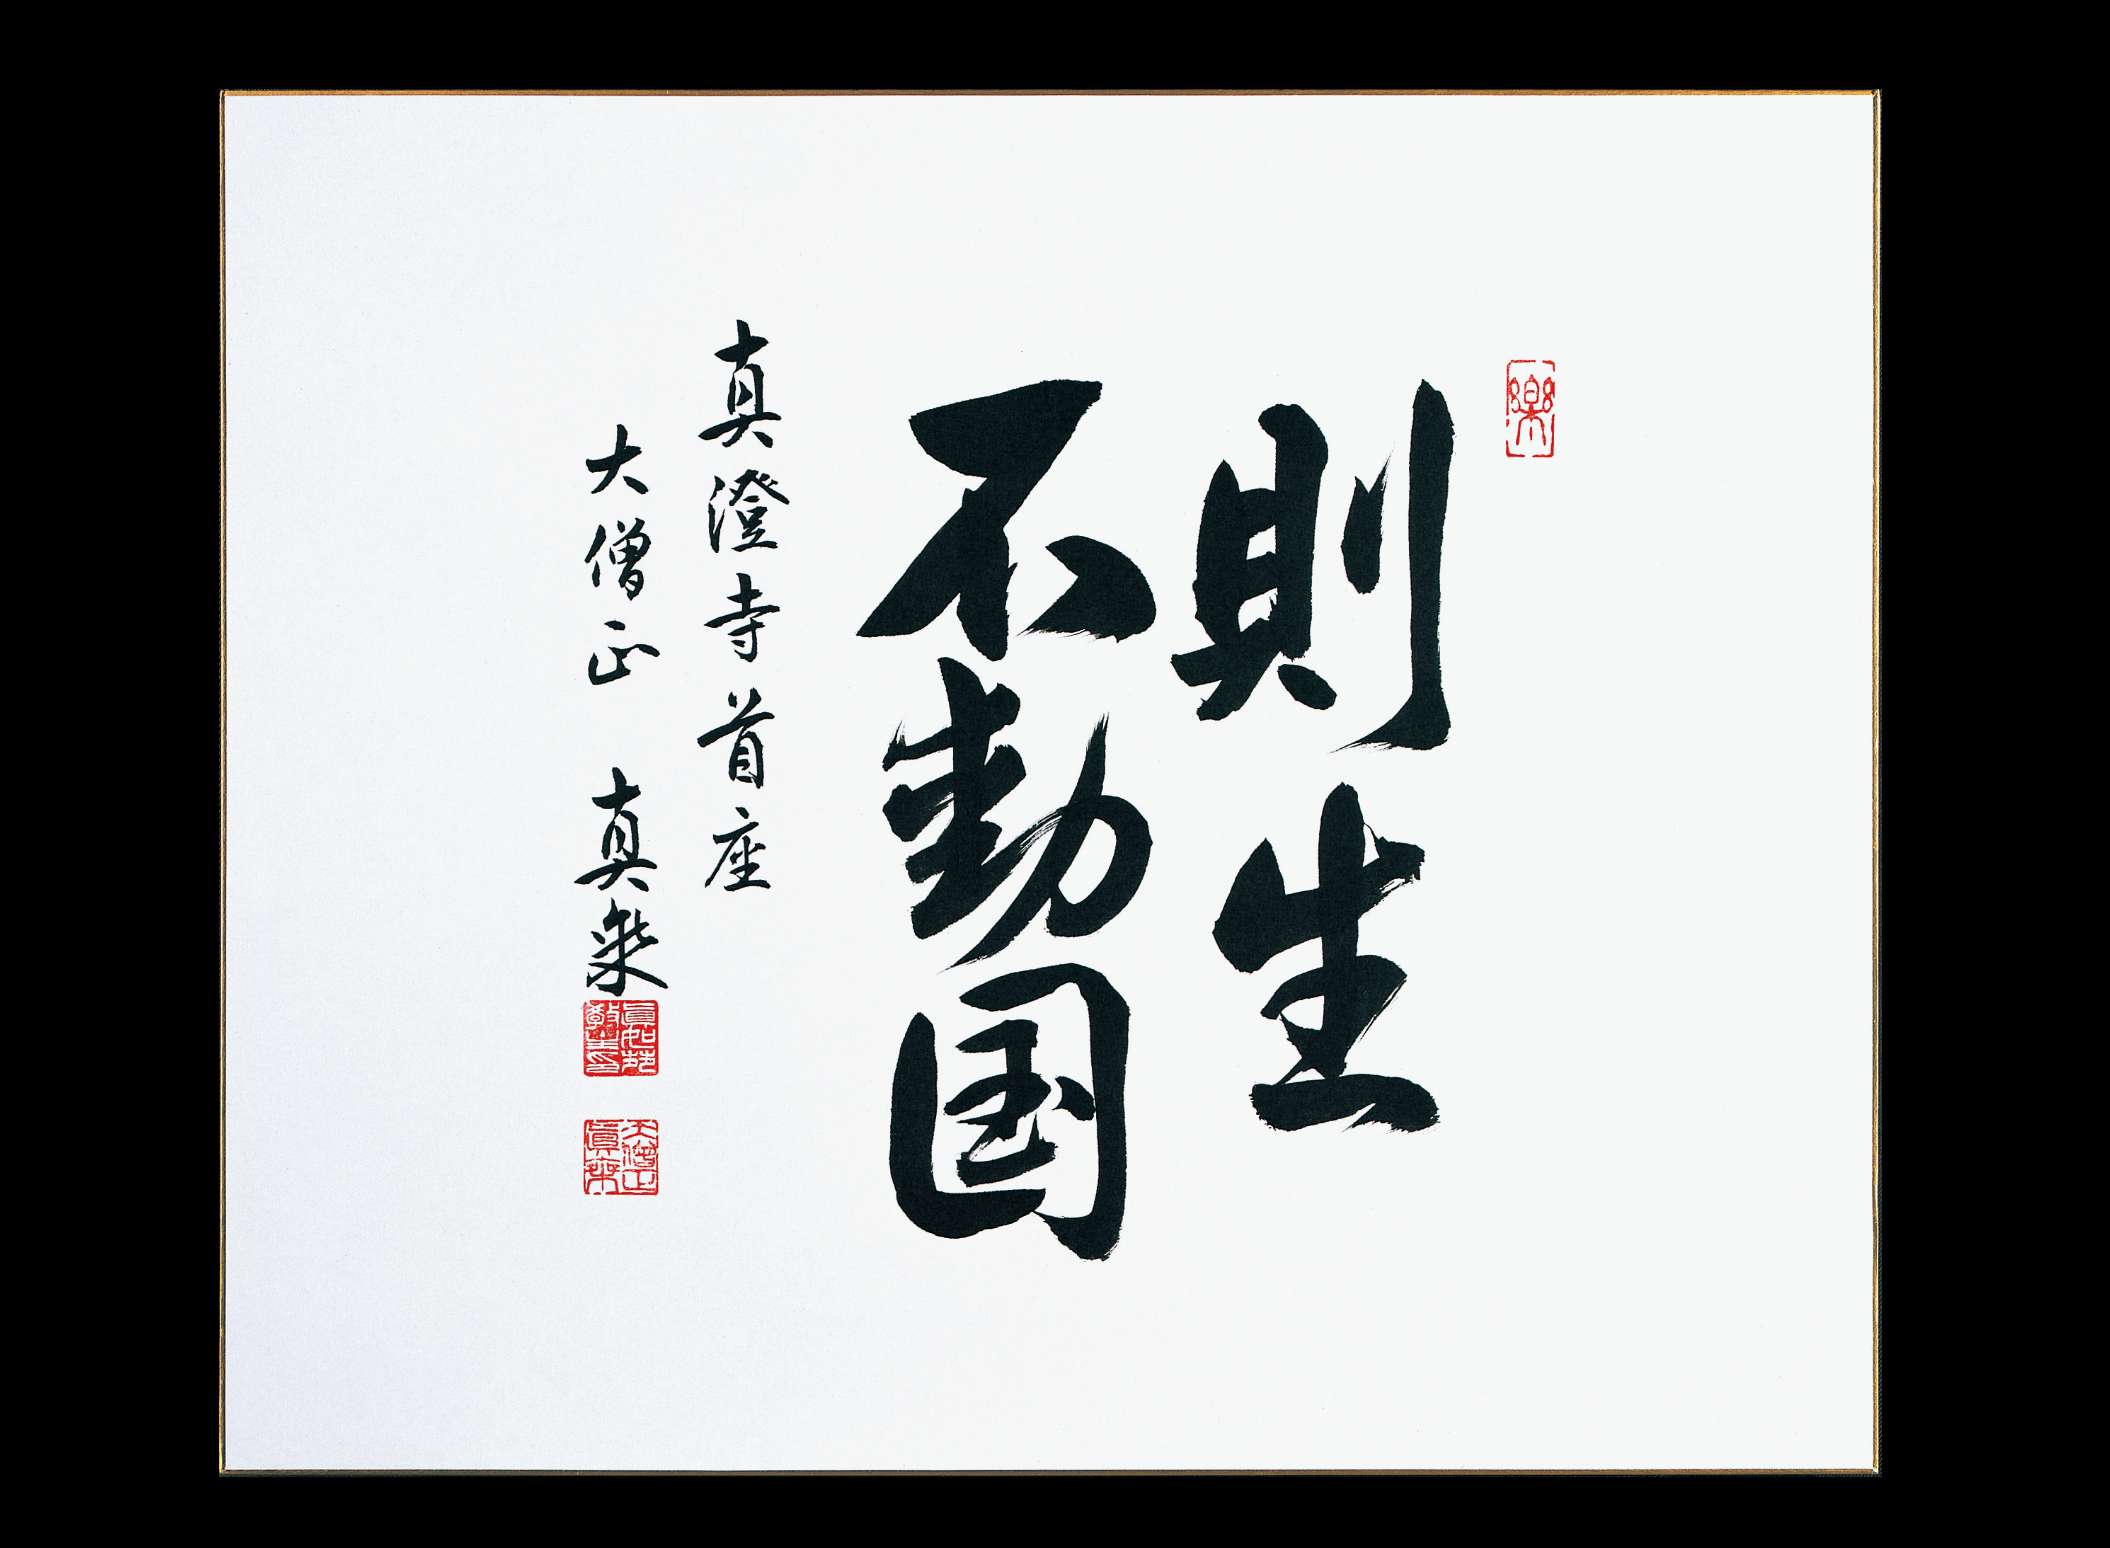 Five large Japanese calligraphy characters are written with brush on a squat, rectangular sheet of paper; to the left are two smaller lines of calligraphy with two stamp impressions in red.